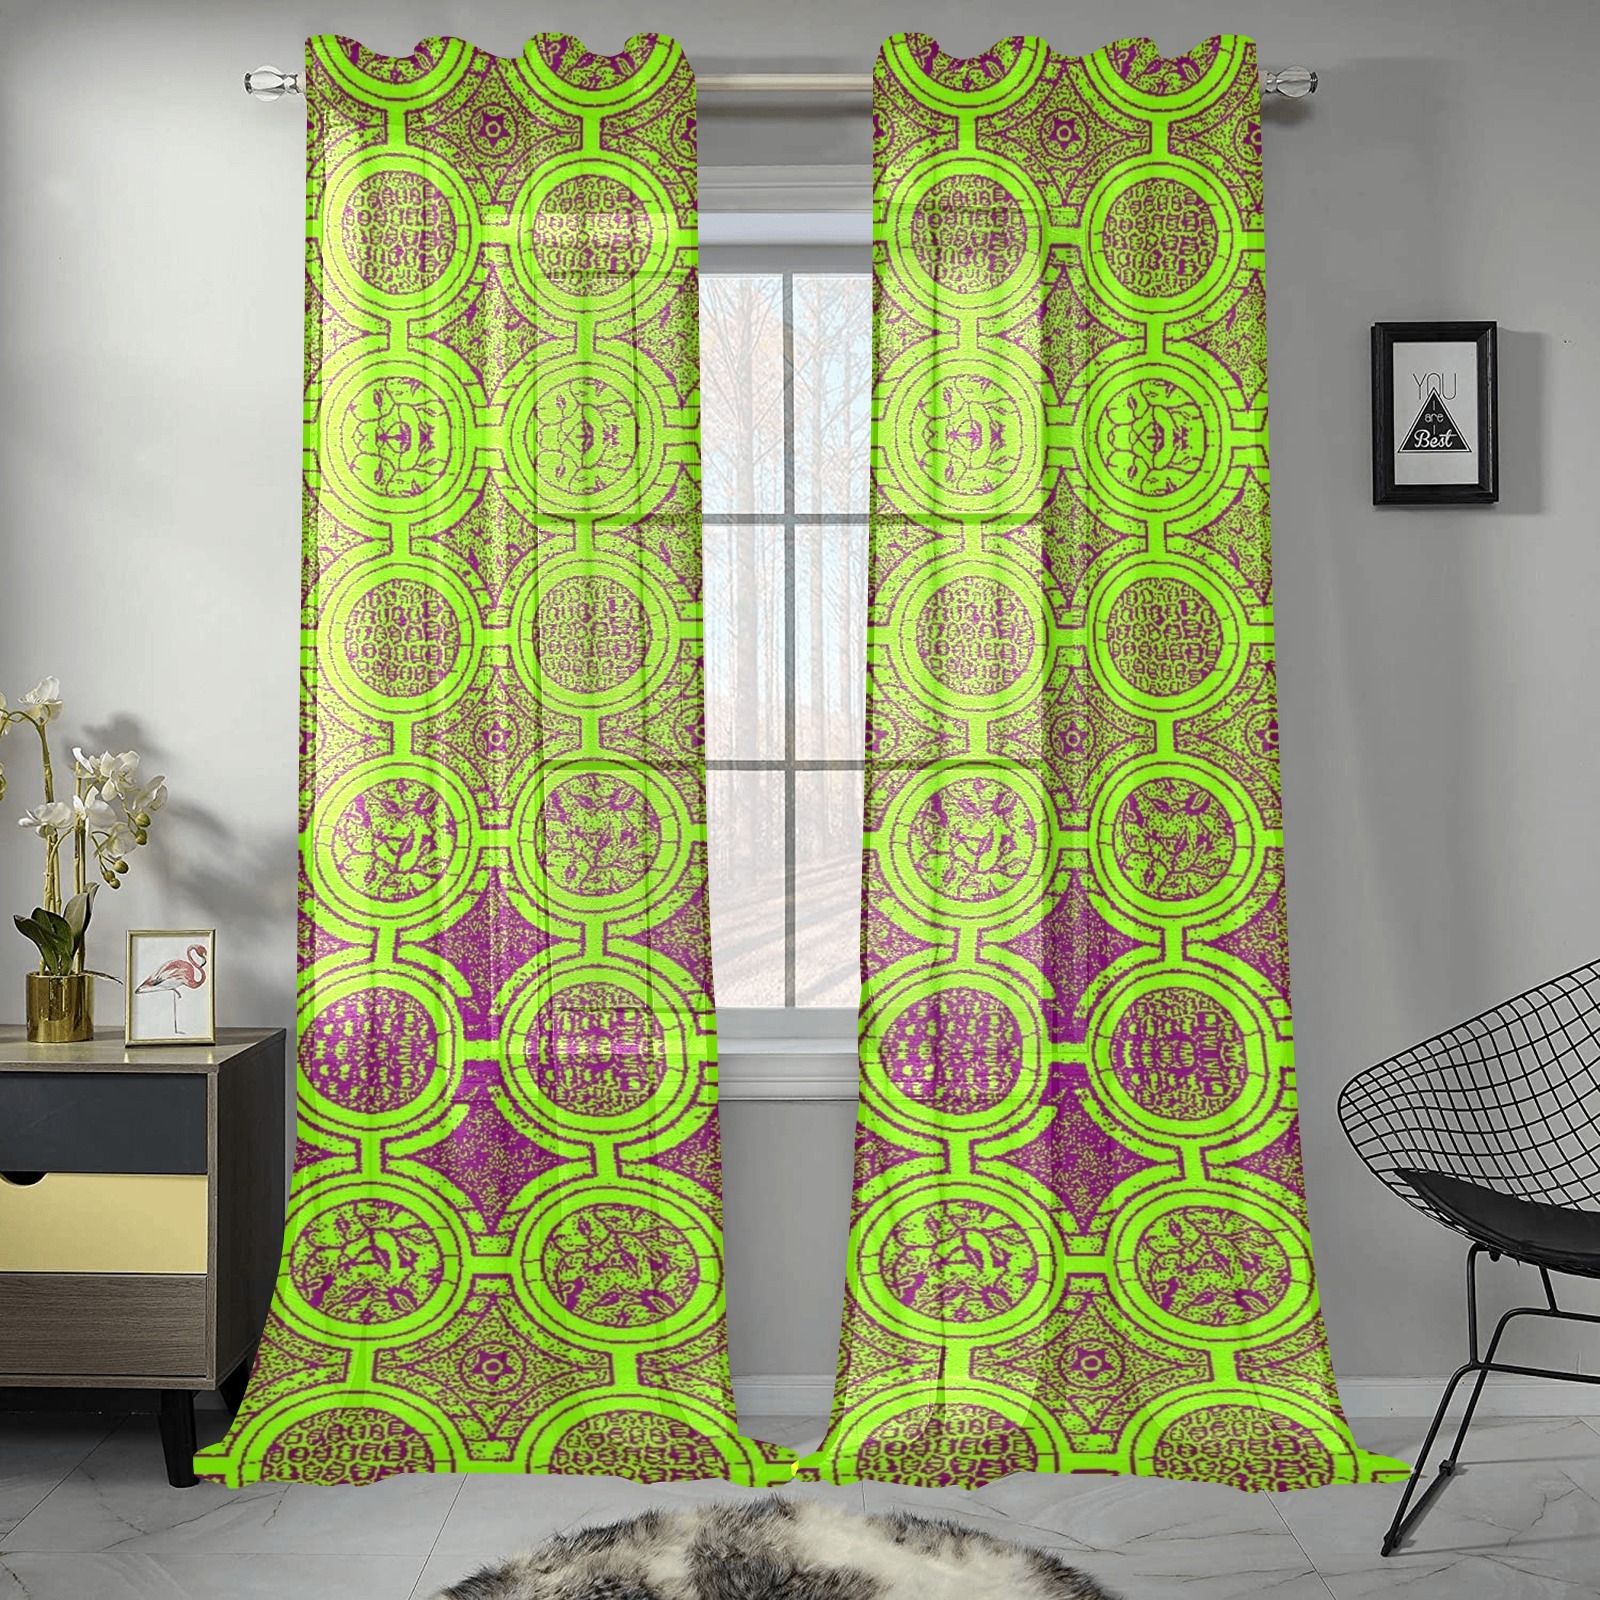 AFRICAN PRINT PATTERN 2 Gauze Curtain 28"x95" (Two-Piece)